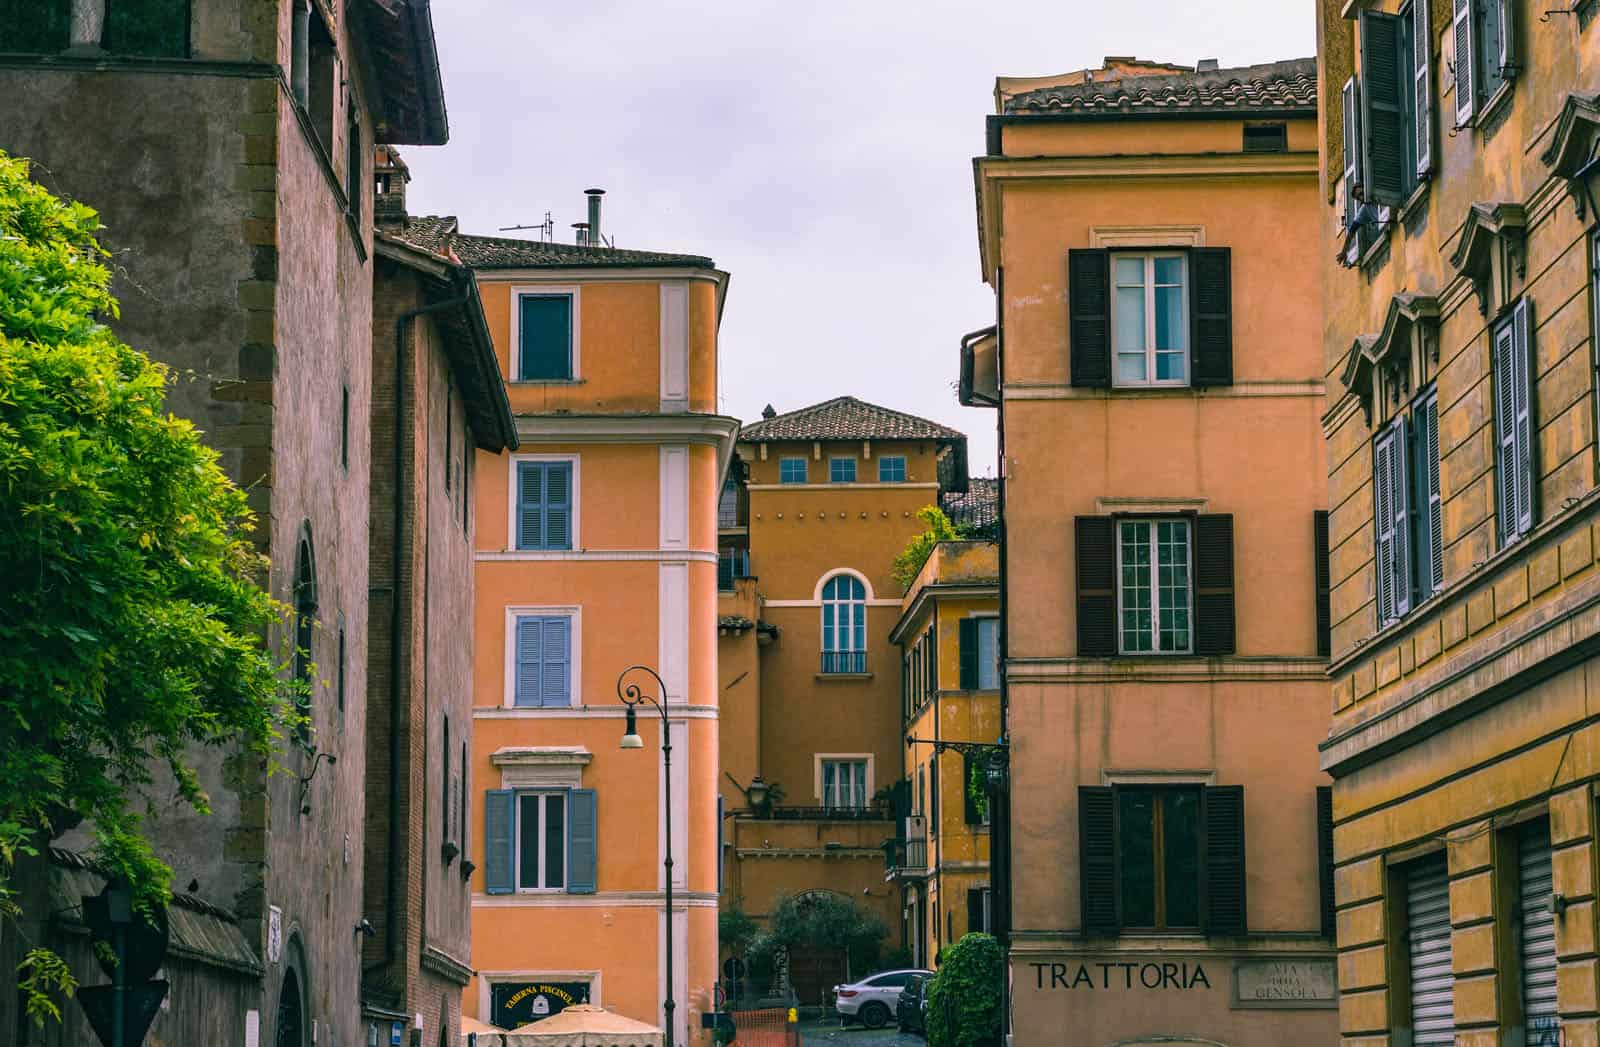 Do a Rome guide tour of Trastevere or walk around yourself.